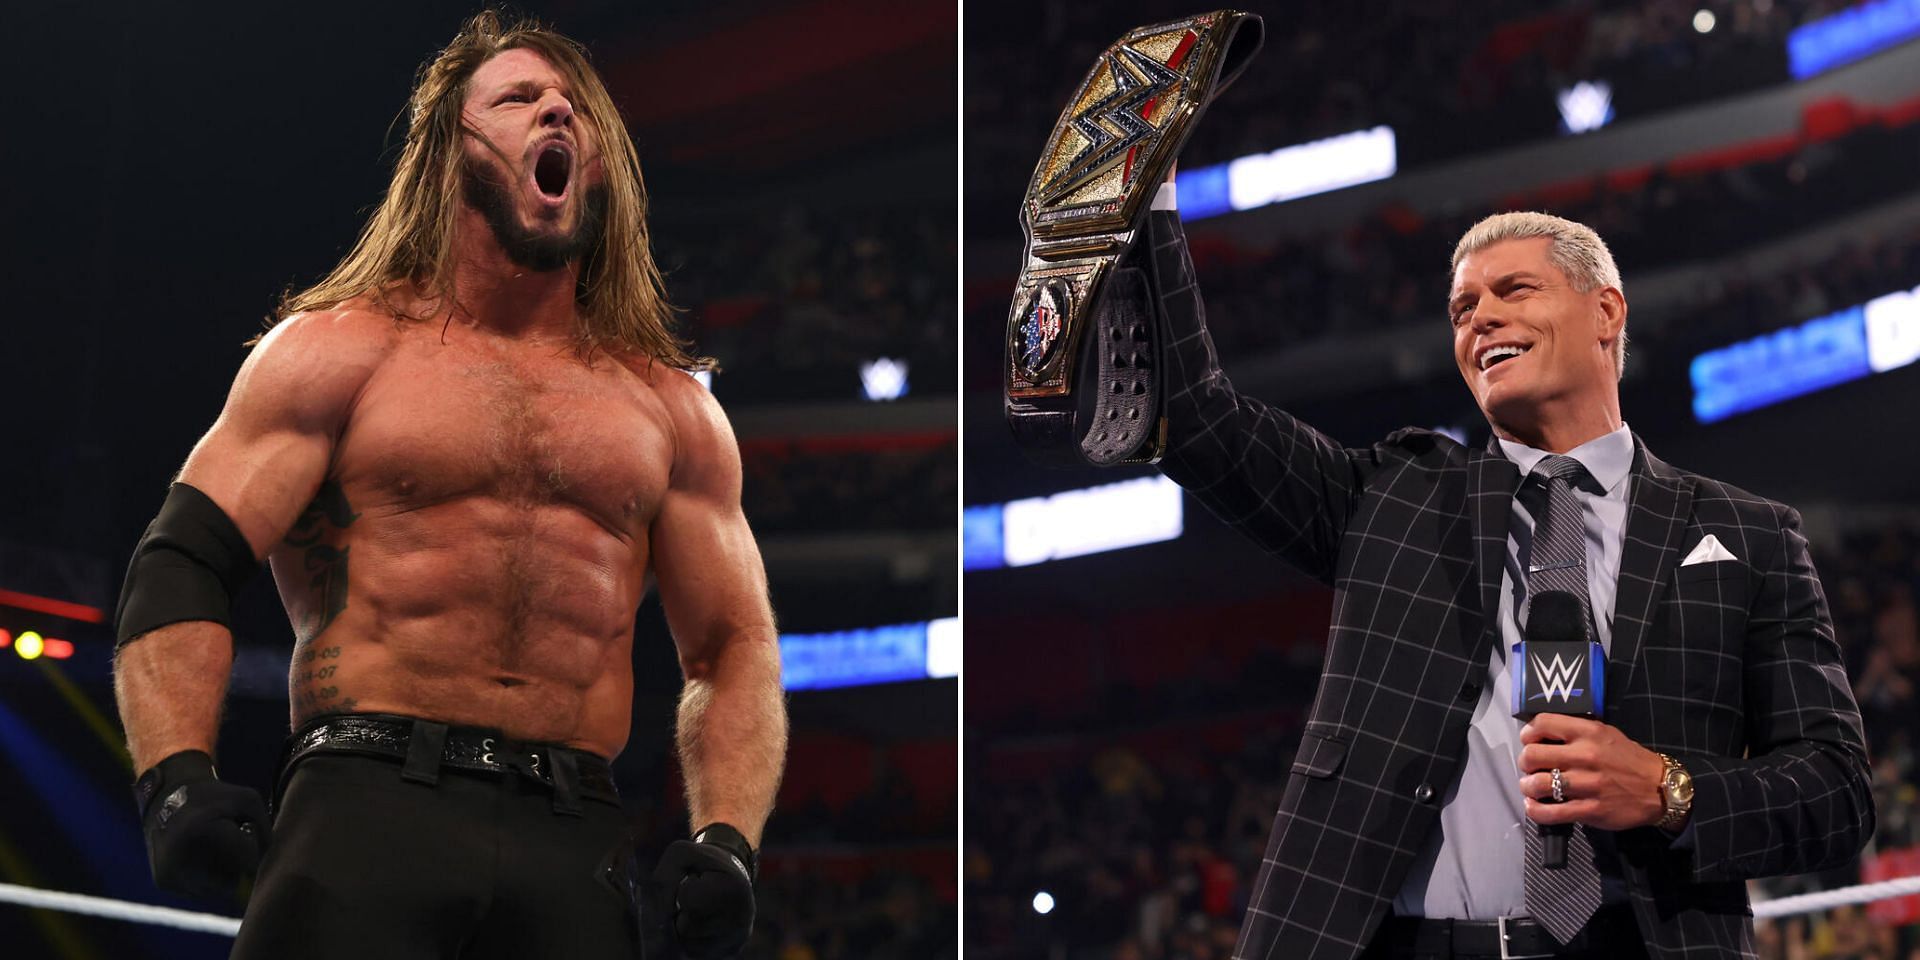 AJ Styles could challenge Cody for the title